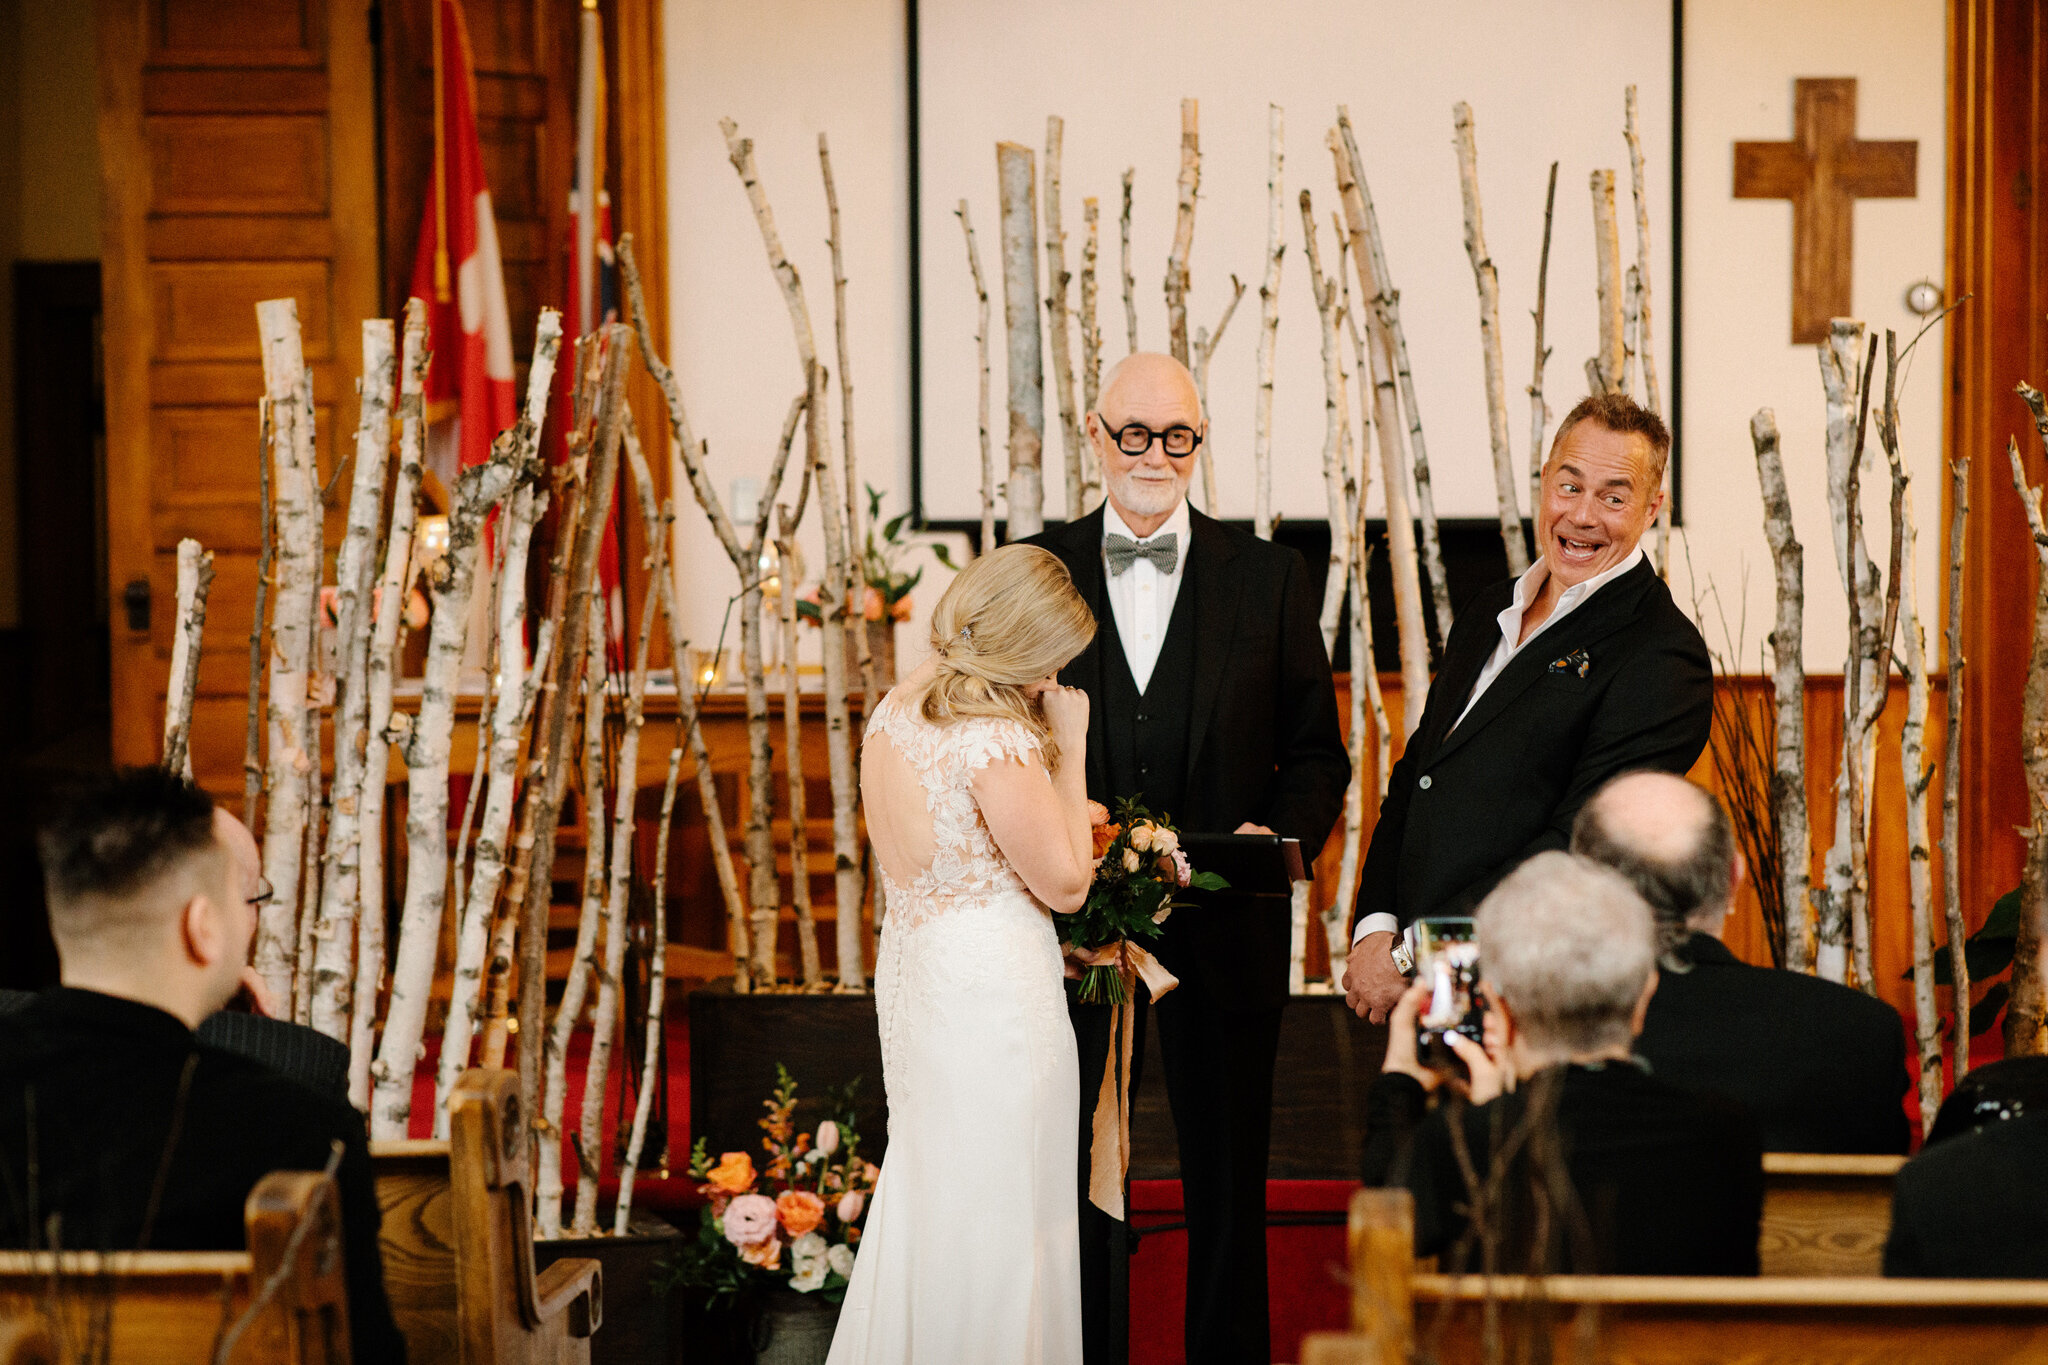 Having a laugh during intimate winter wedding ceremony in Thornb